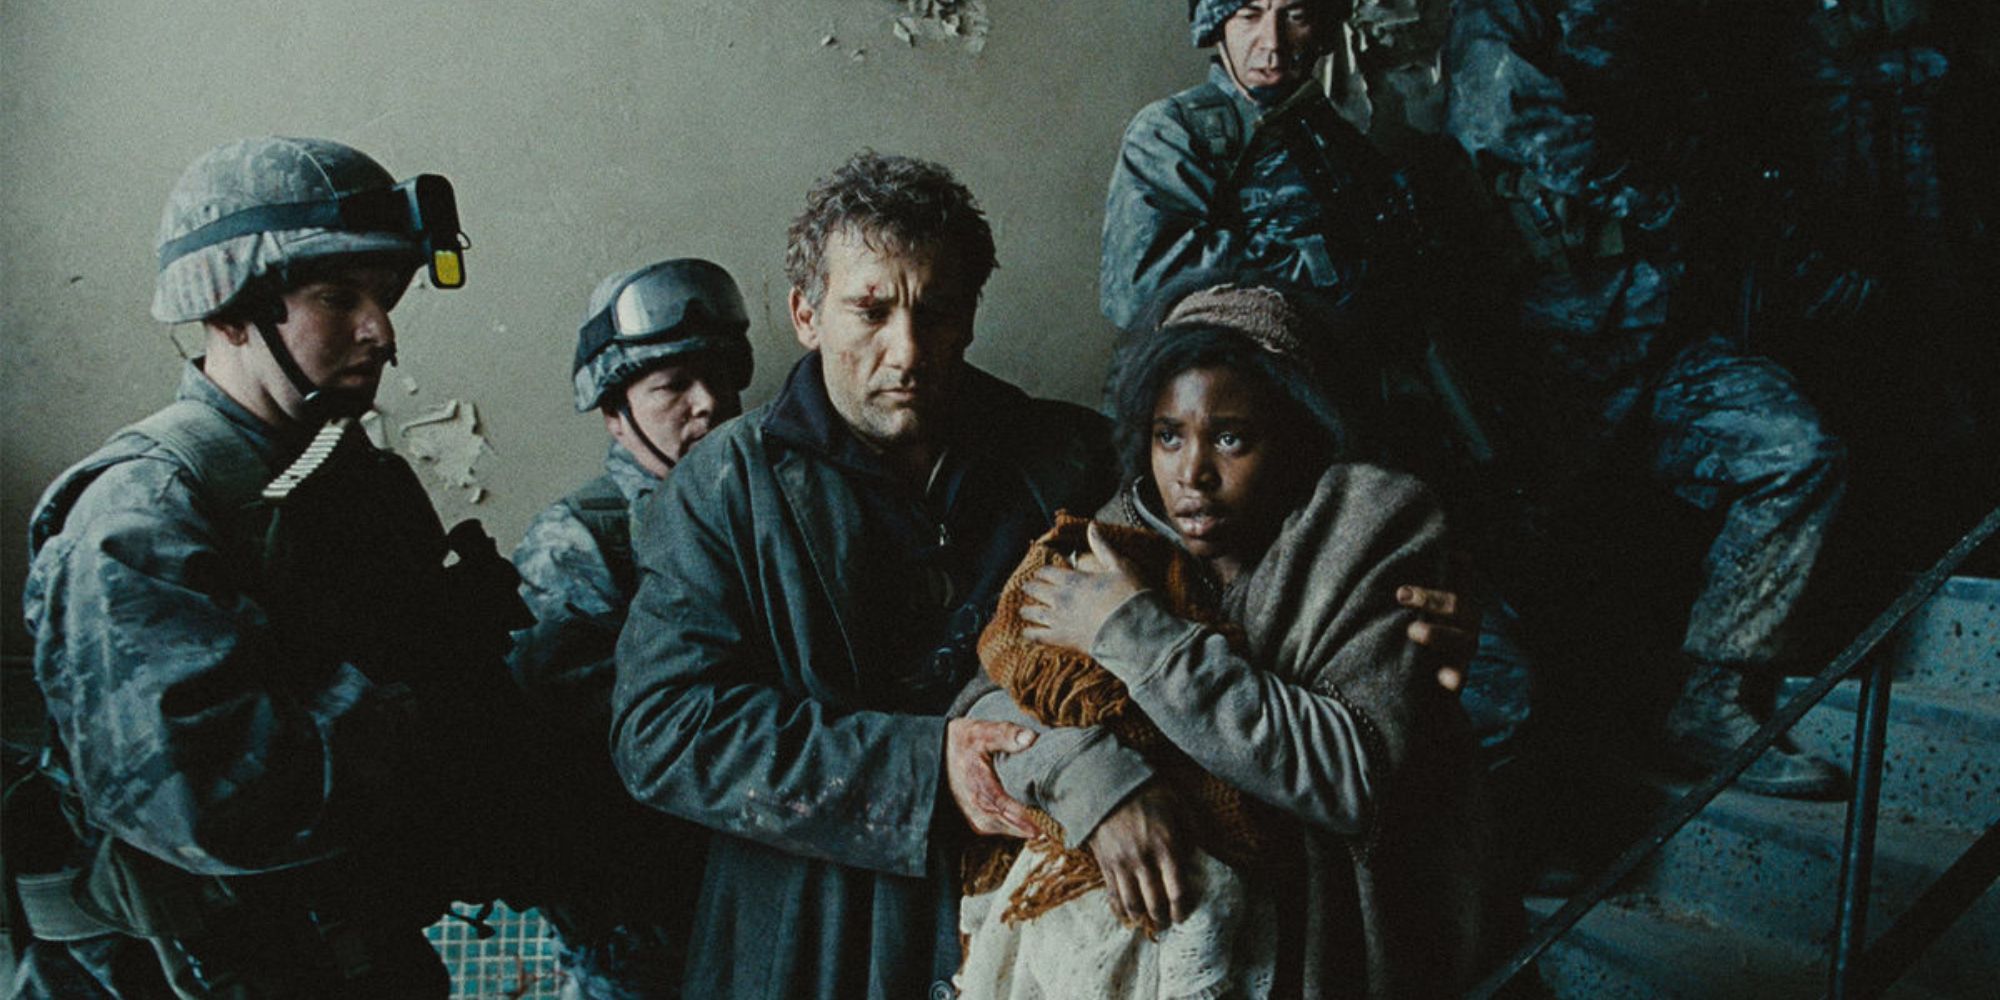 clive owen and clare hope ashitey as theo faron and kee huddling amongst soldiers